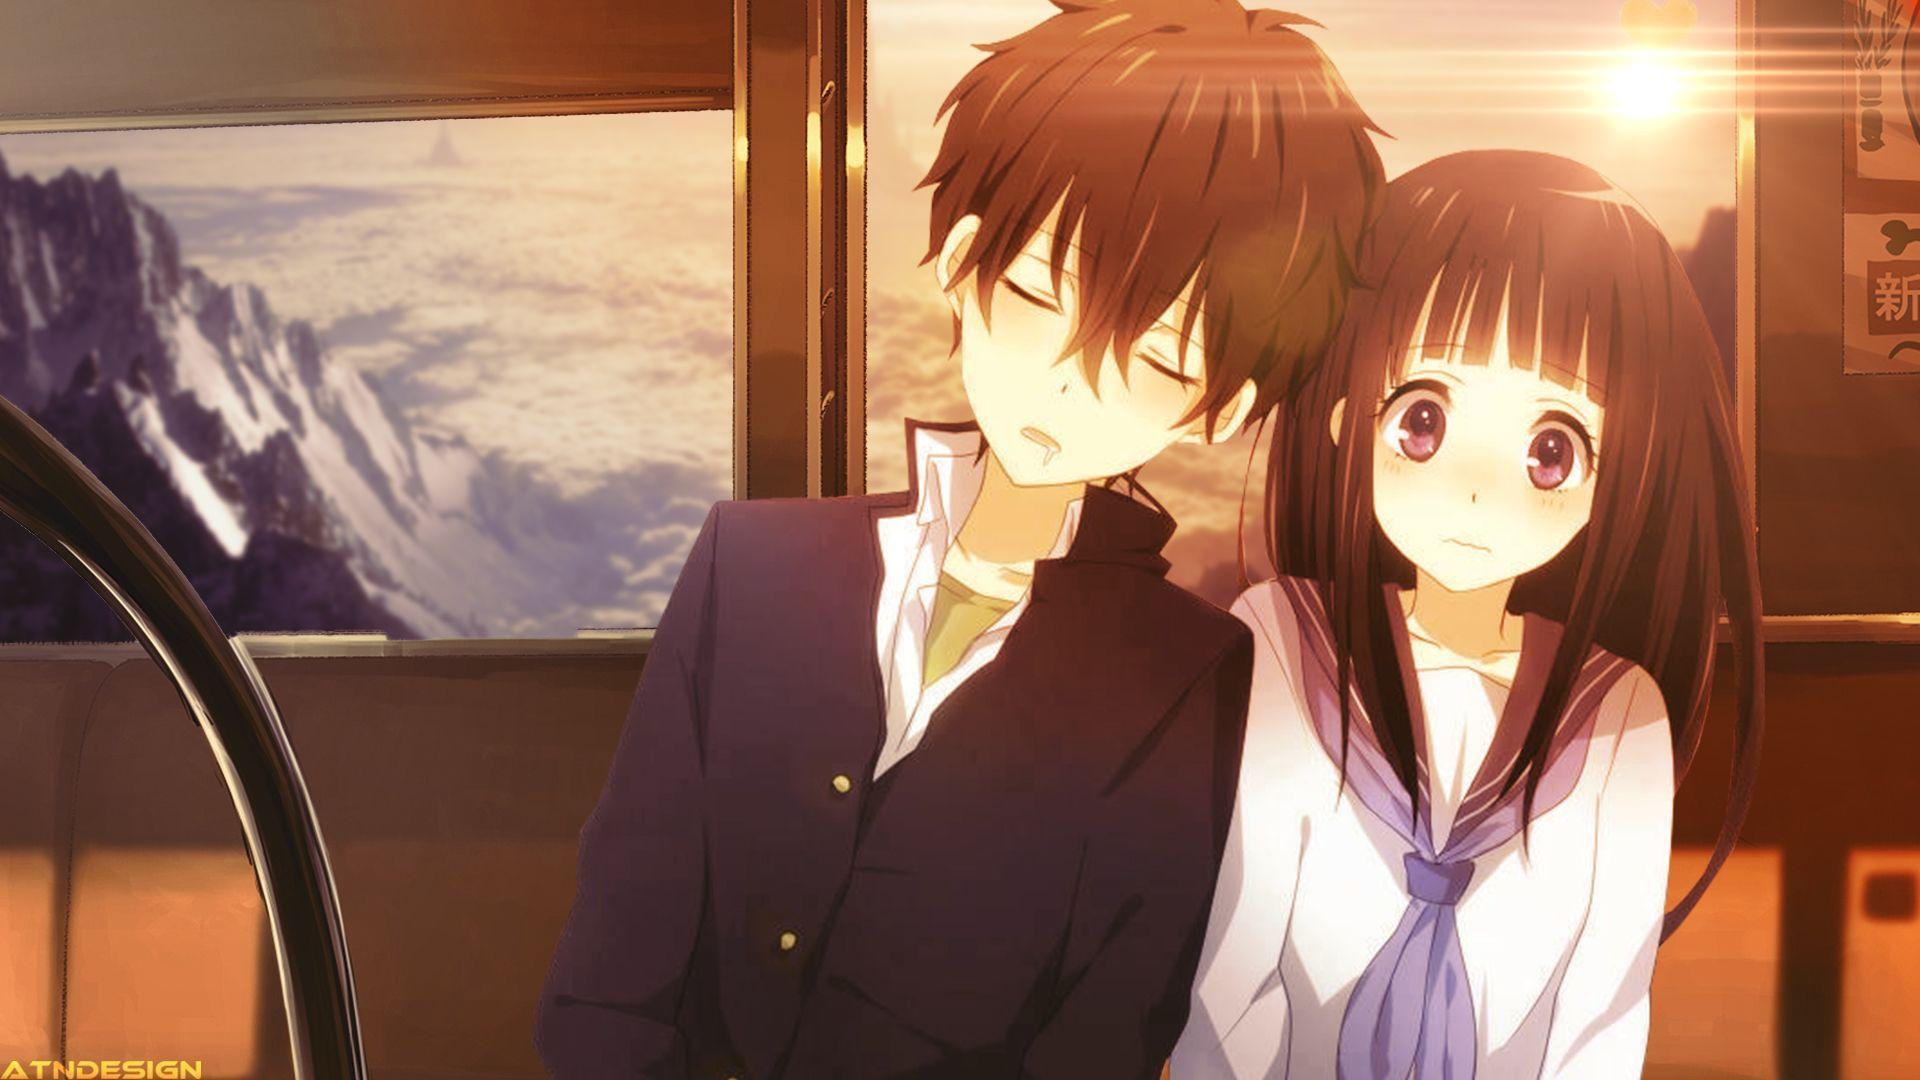 1920 x 1080 · jpeg - Couples Anime Wallpapers - Wallpaper Cave